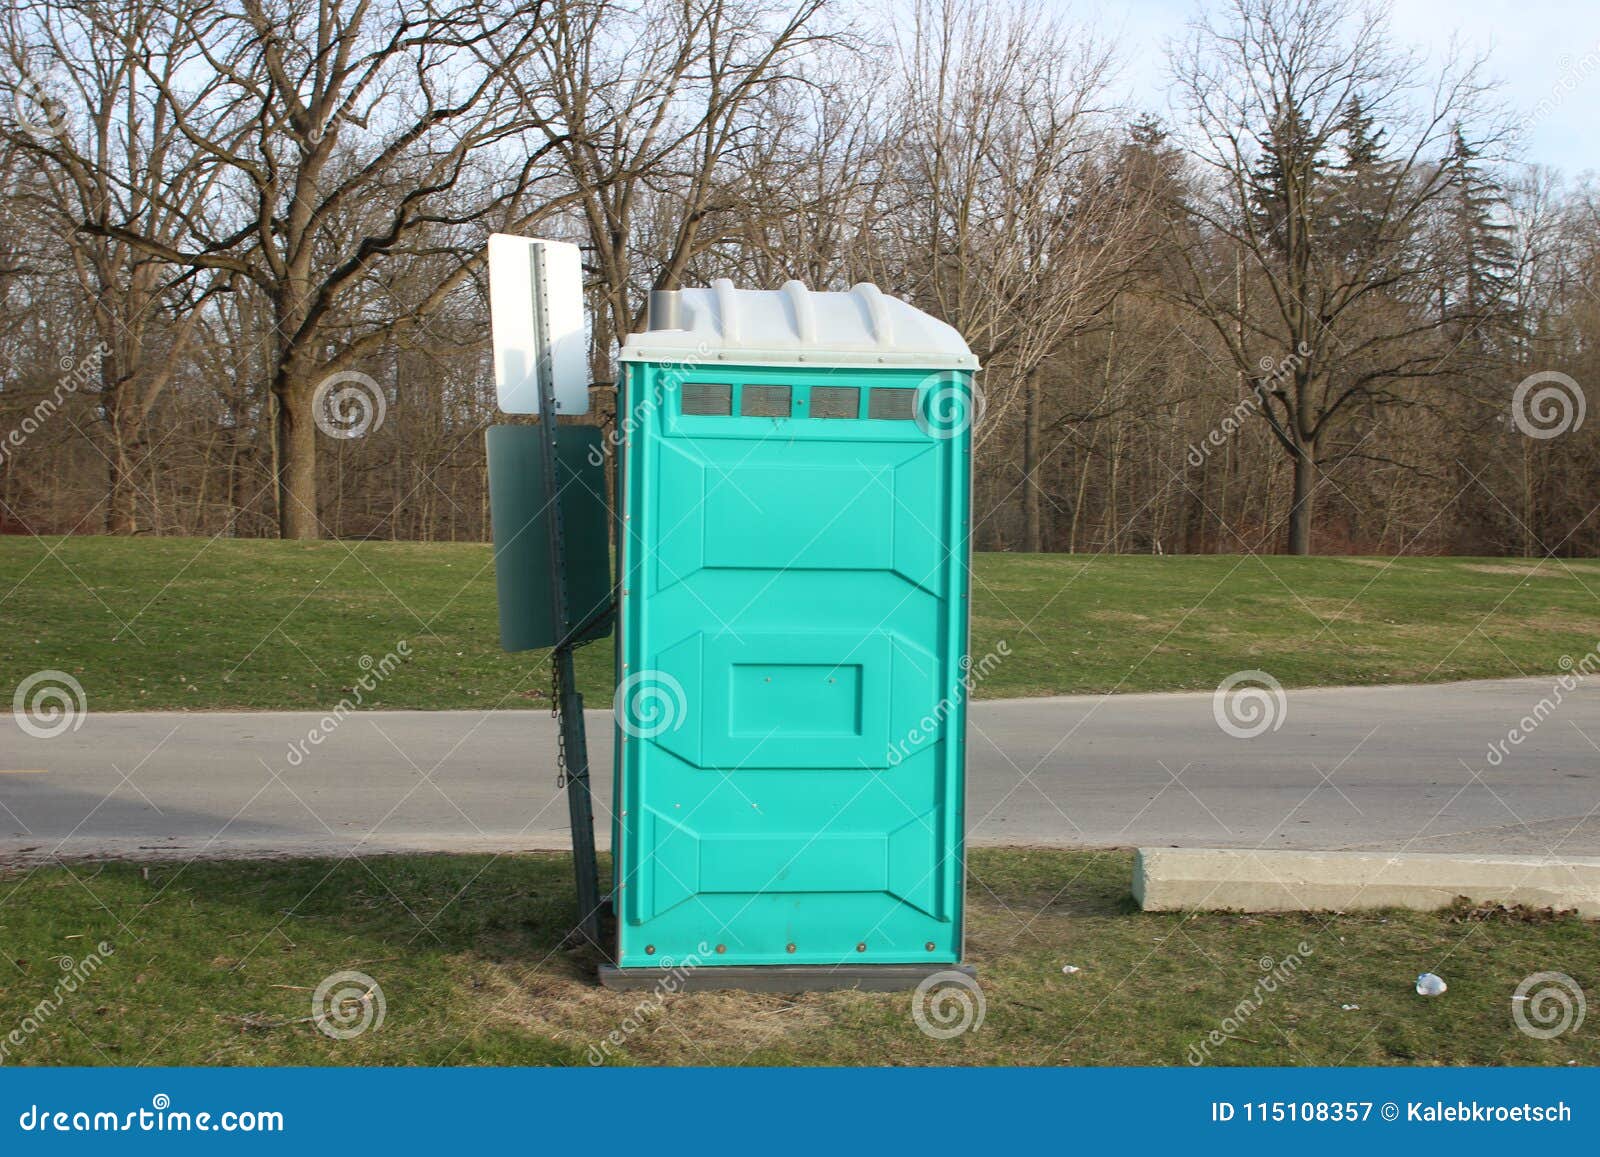 a dirty, blue portable toilet in a park, nasty looking place to go to the bathroom